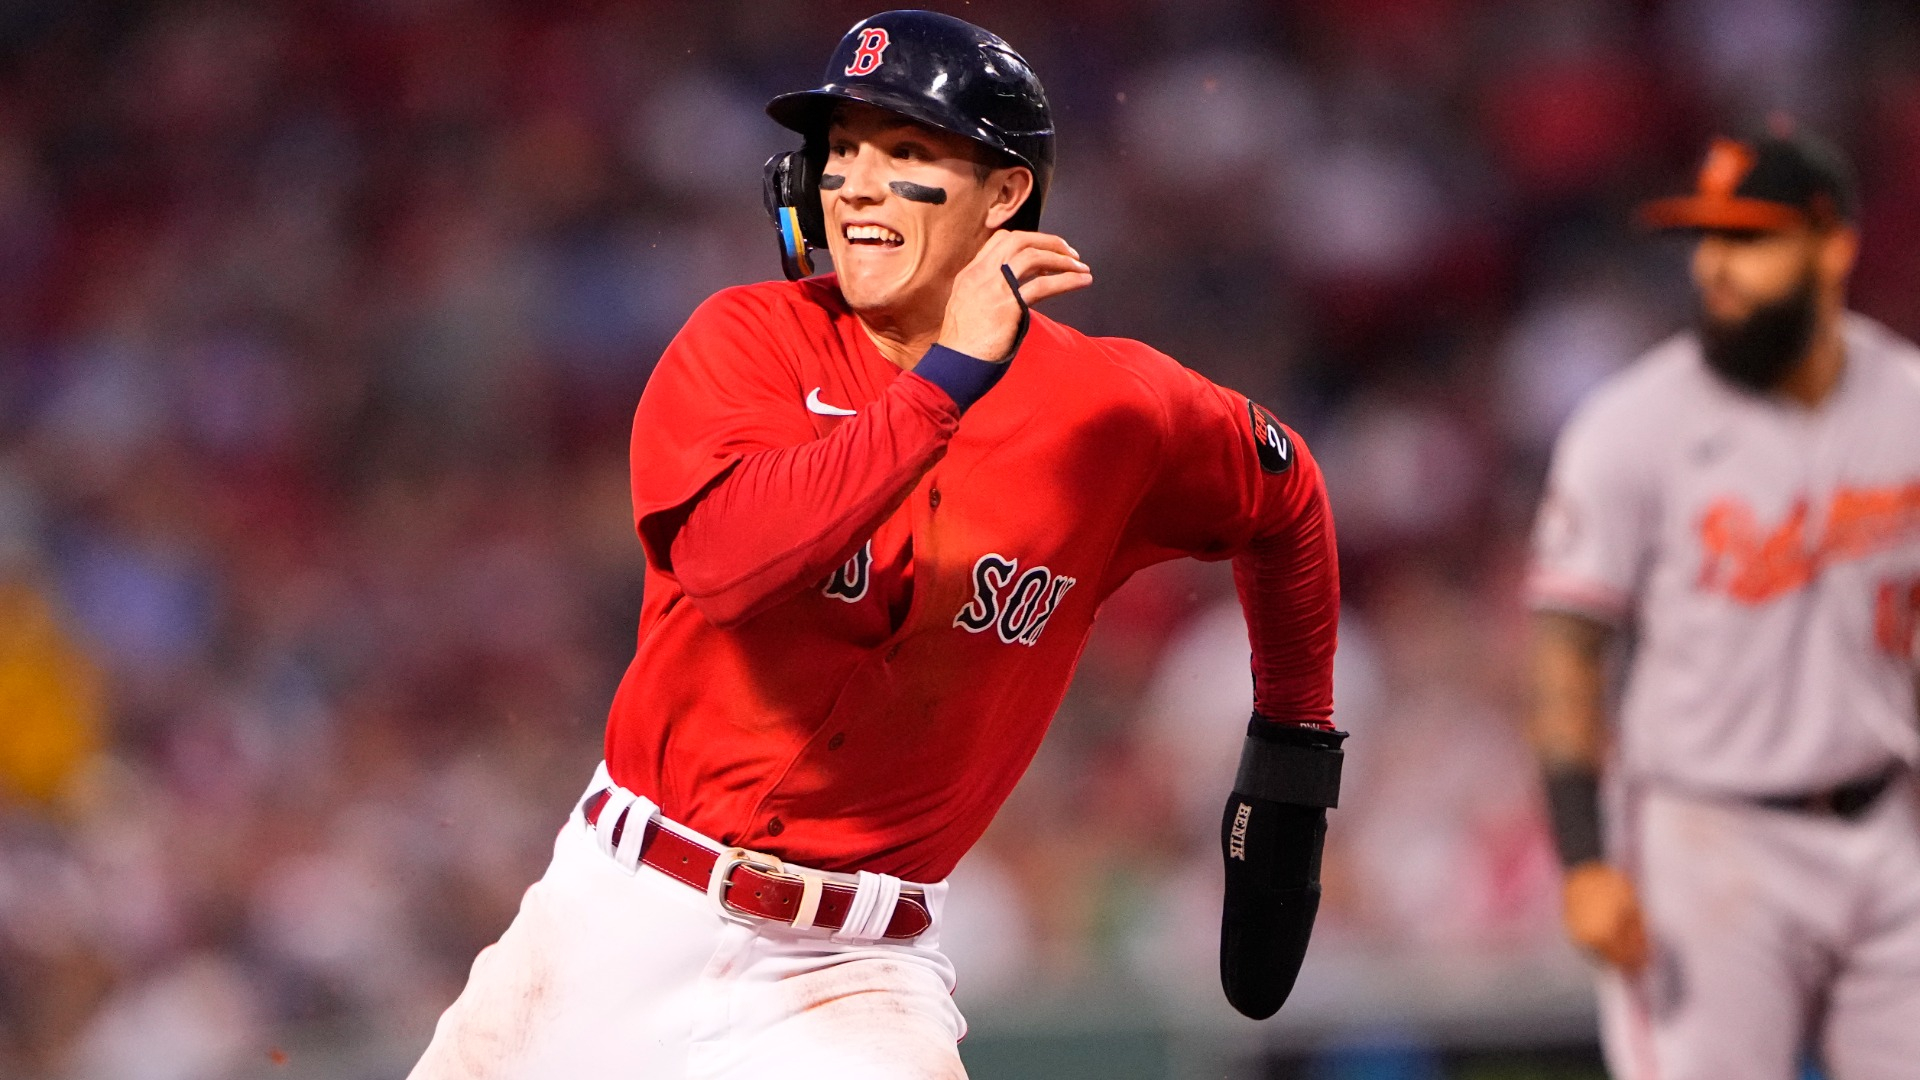 Should Boston Red Sox's Jarren Duran have scored on potential